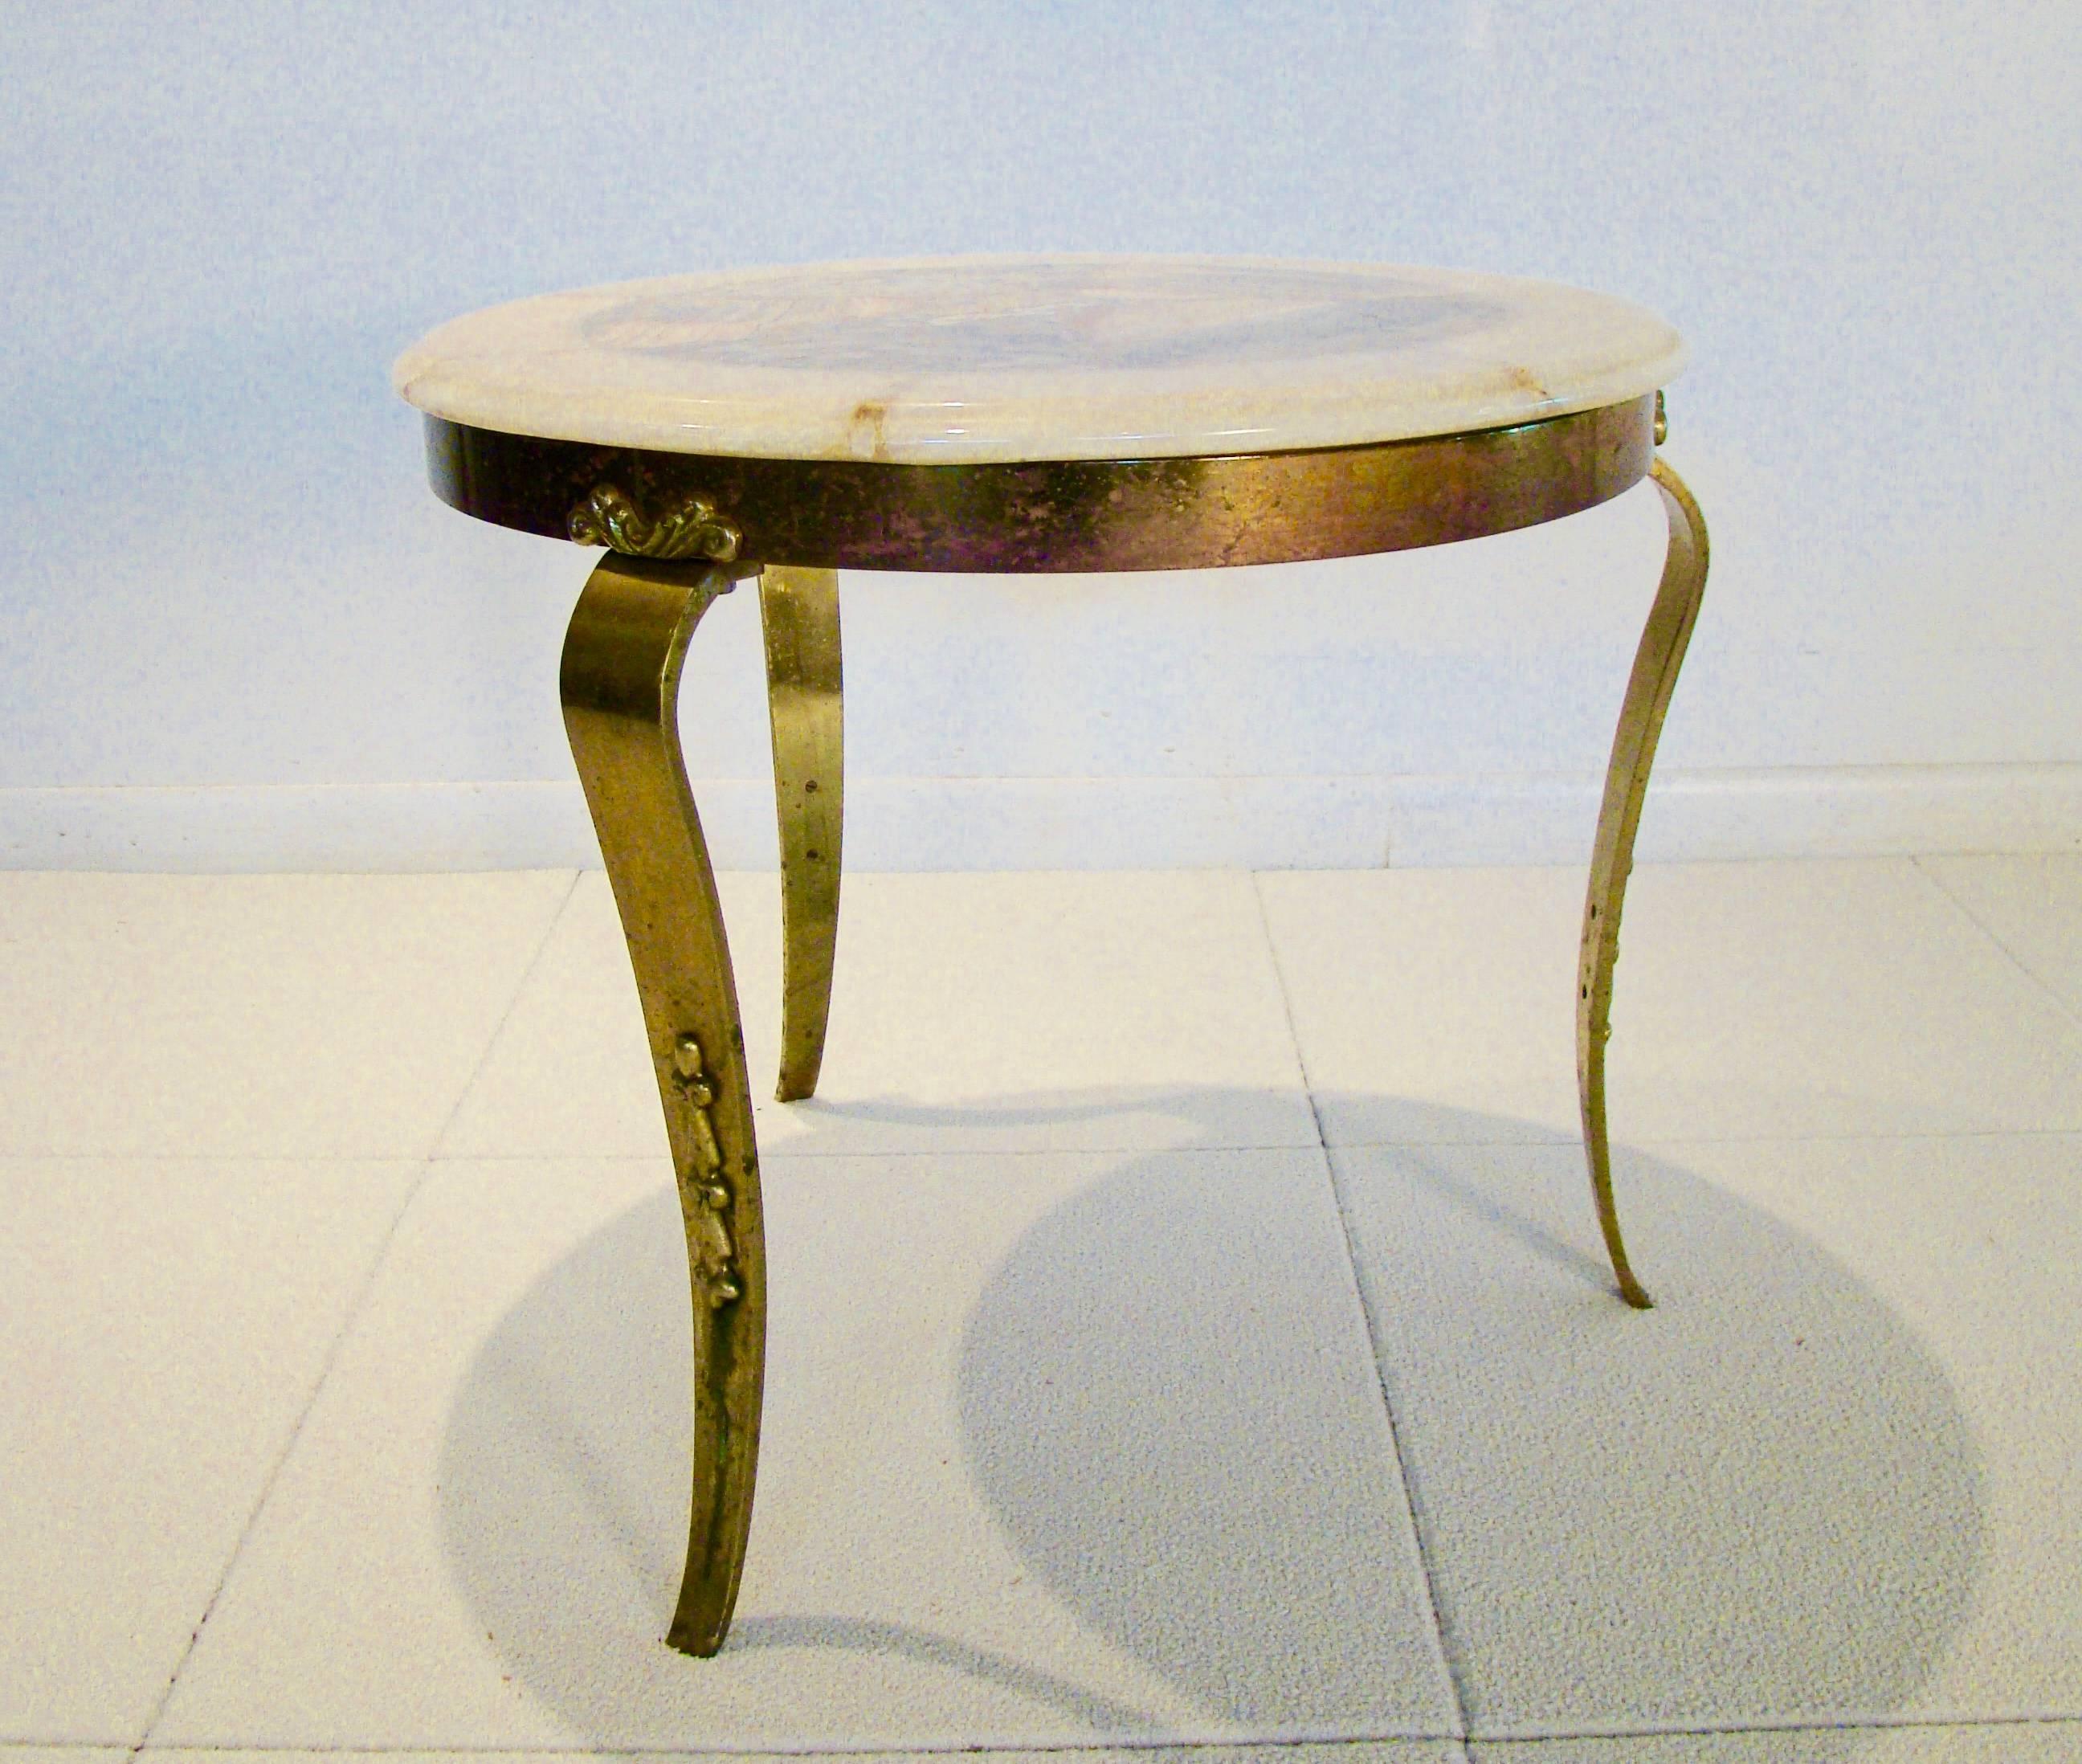 Beautiful stylish and sculptural onyx and solid brass table after Arturo Pani.